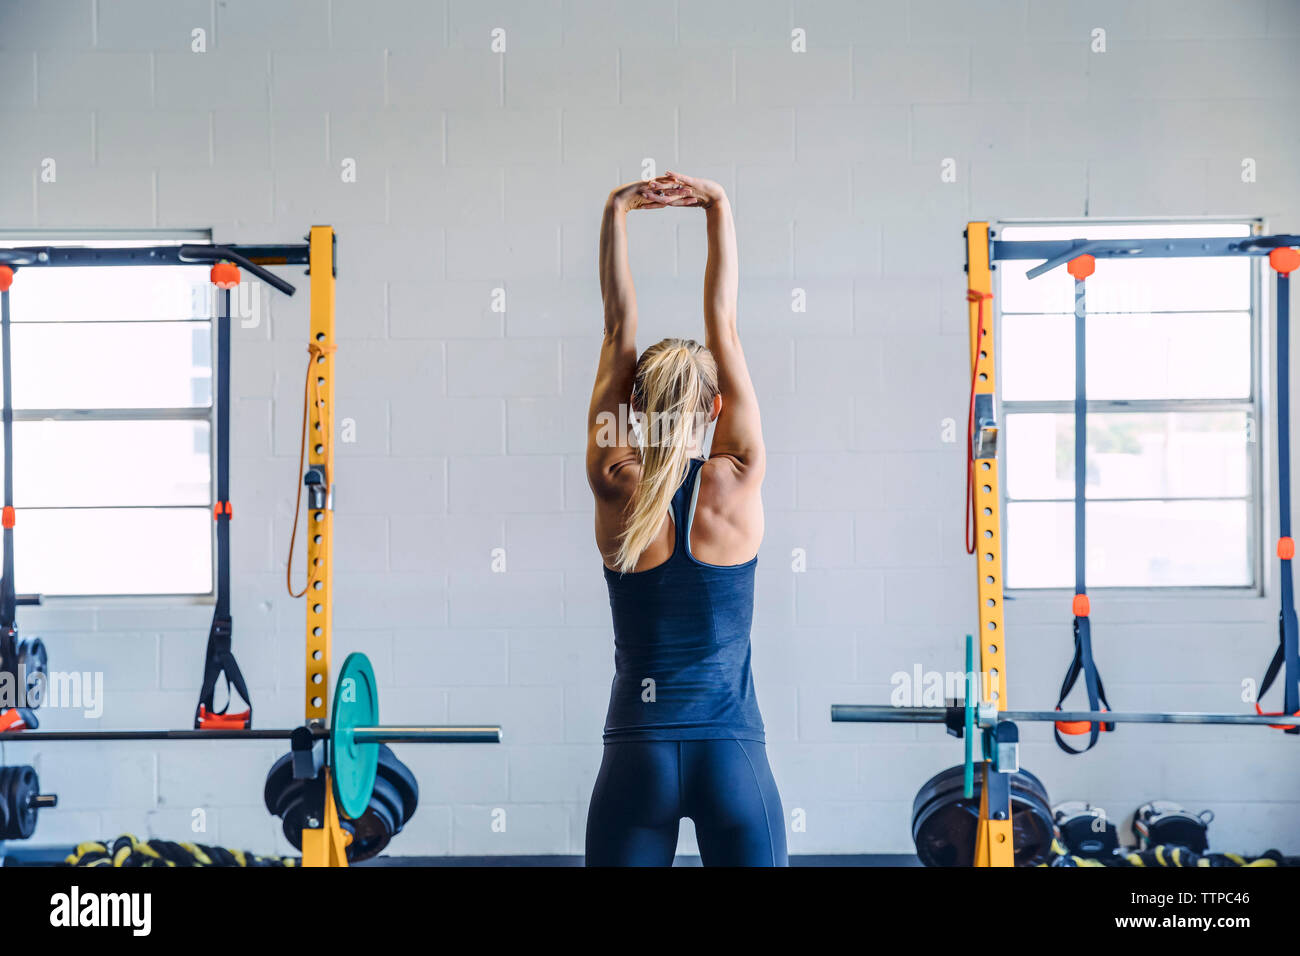 Rear view of woman with hands clasped exercising against wall in gym Stock Photo